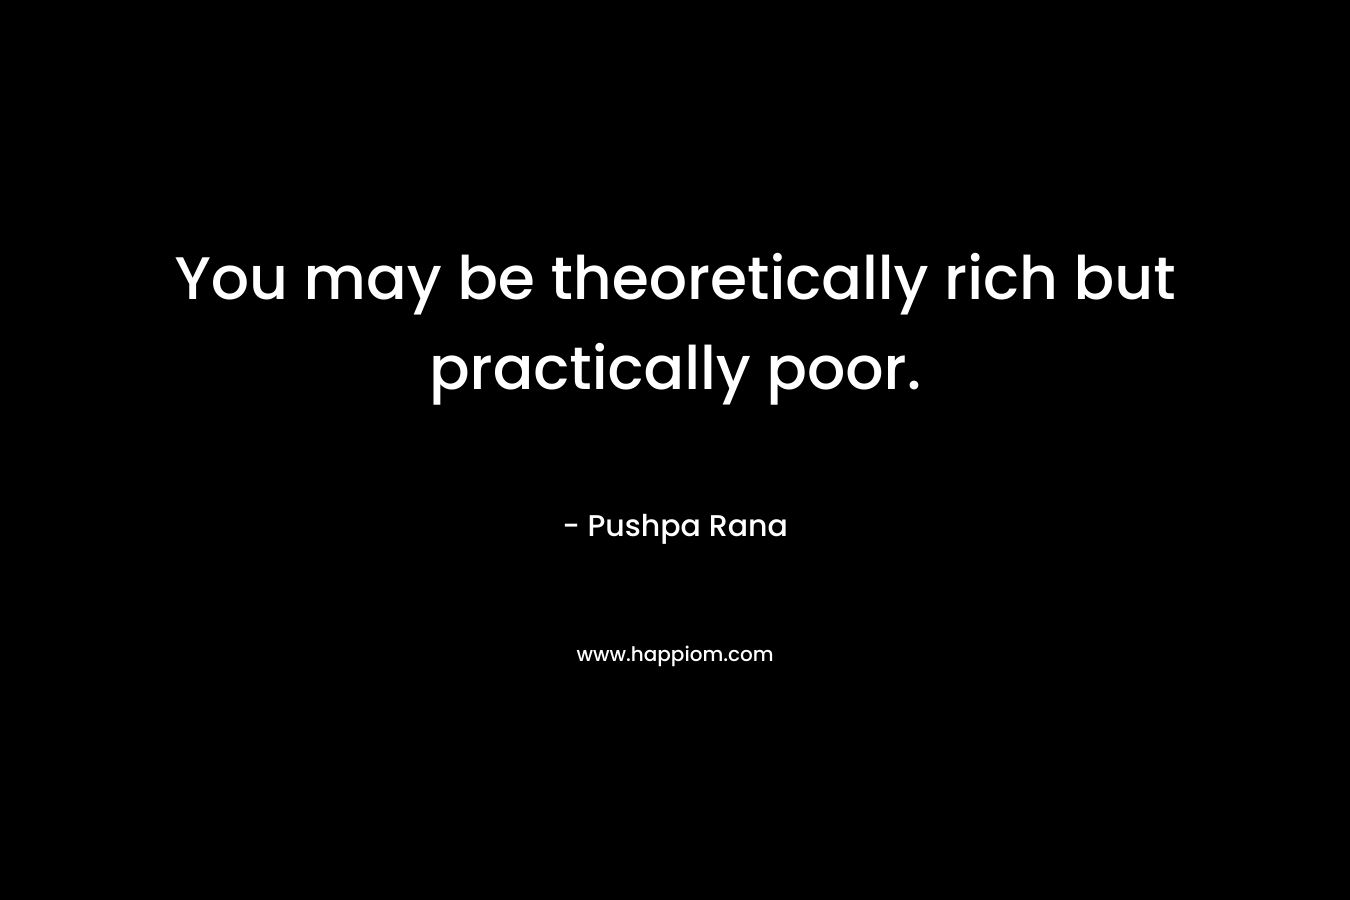 You may be theoretically rich but practically poor. – Pushpa Rana